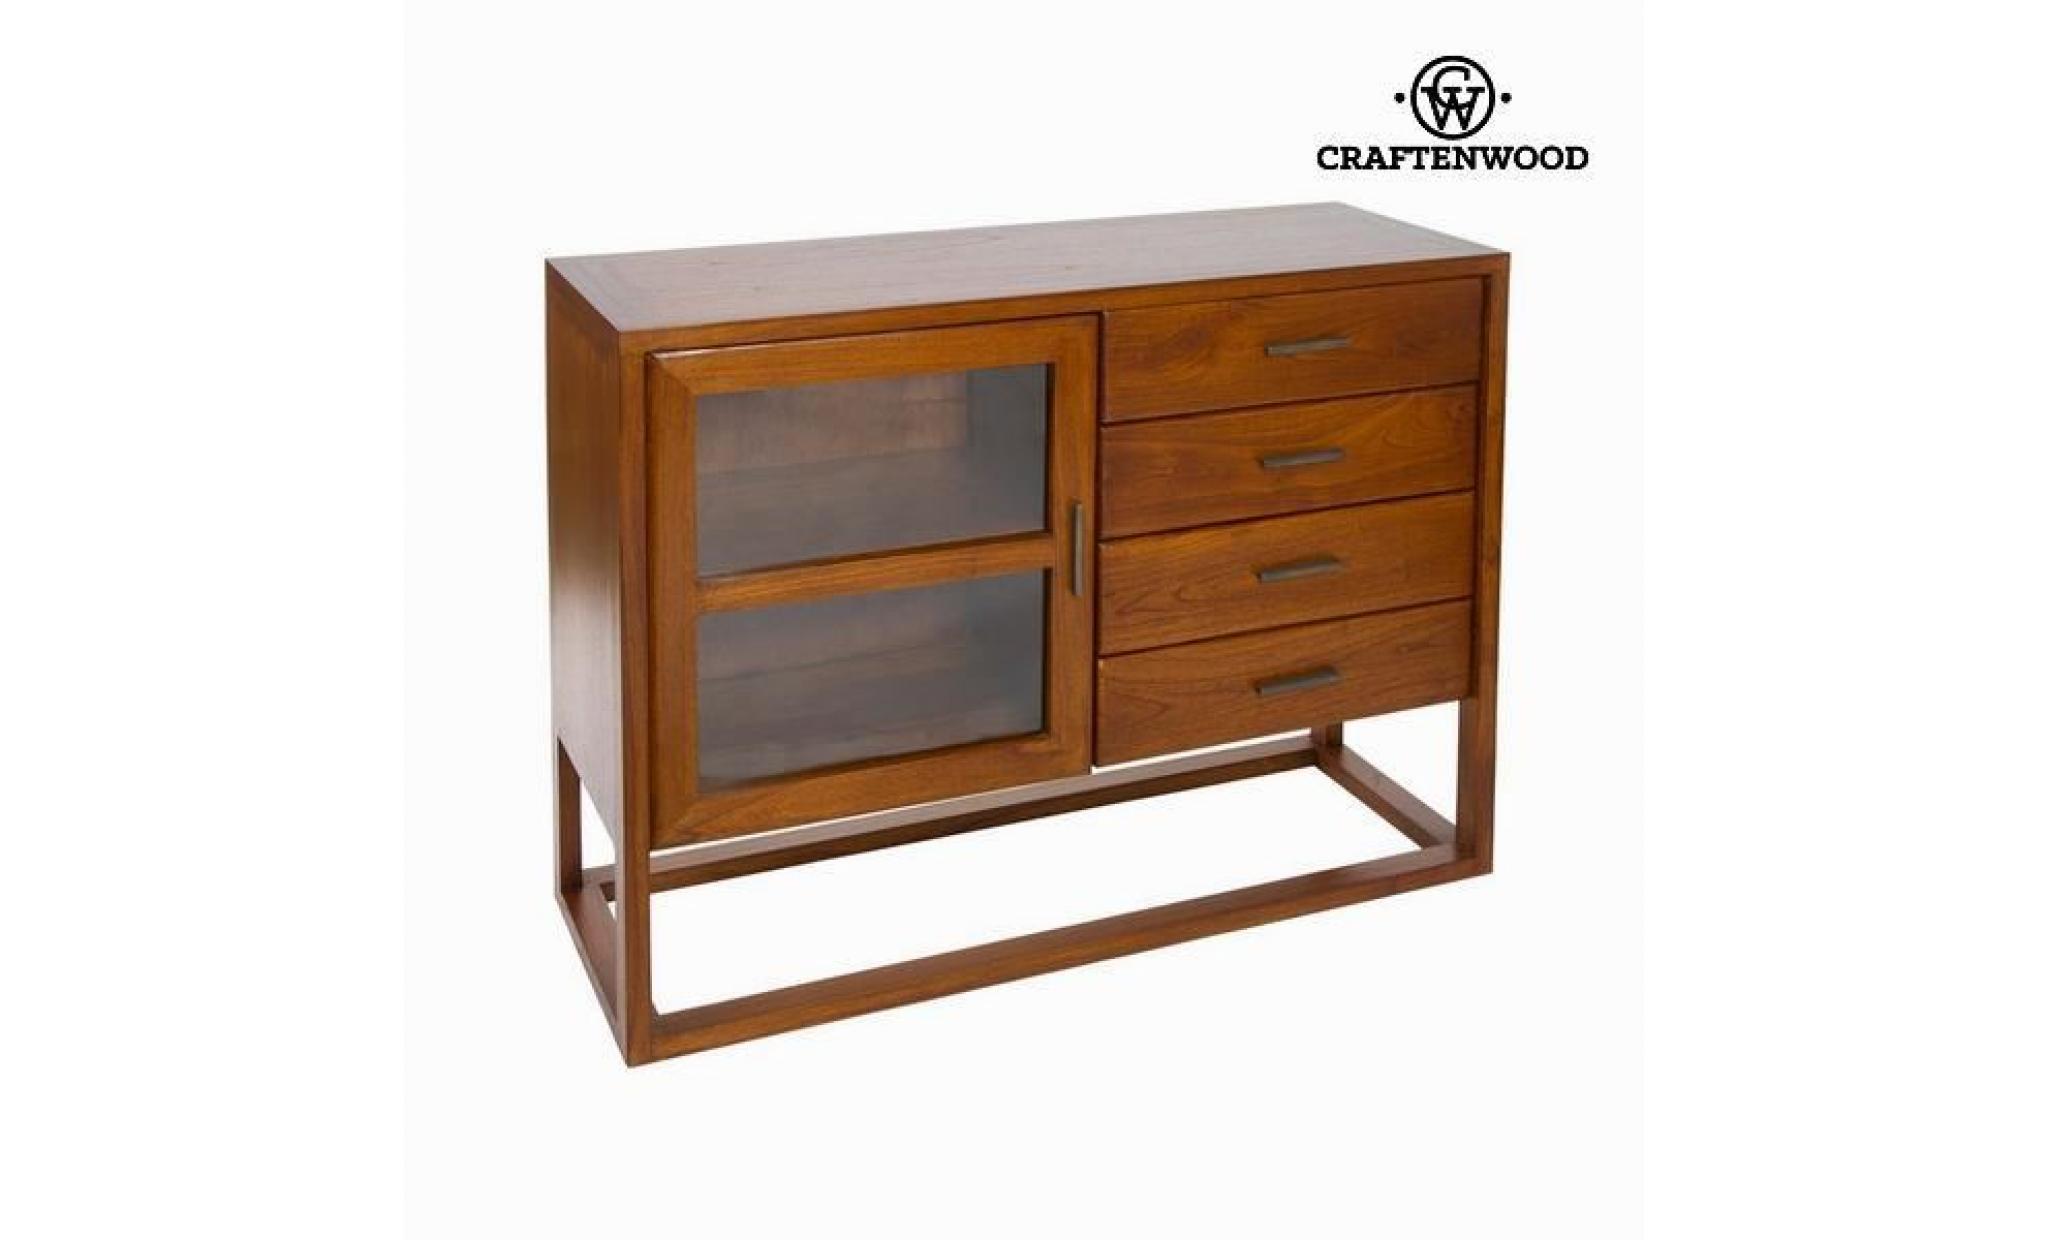 craftenwood   buffet vintage   collection serious line by craften wood